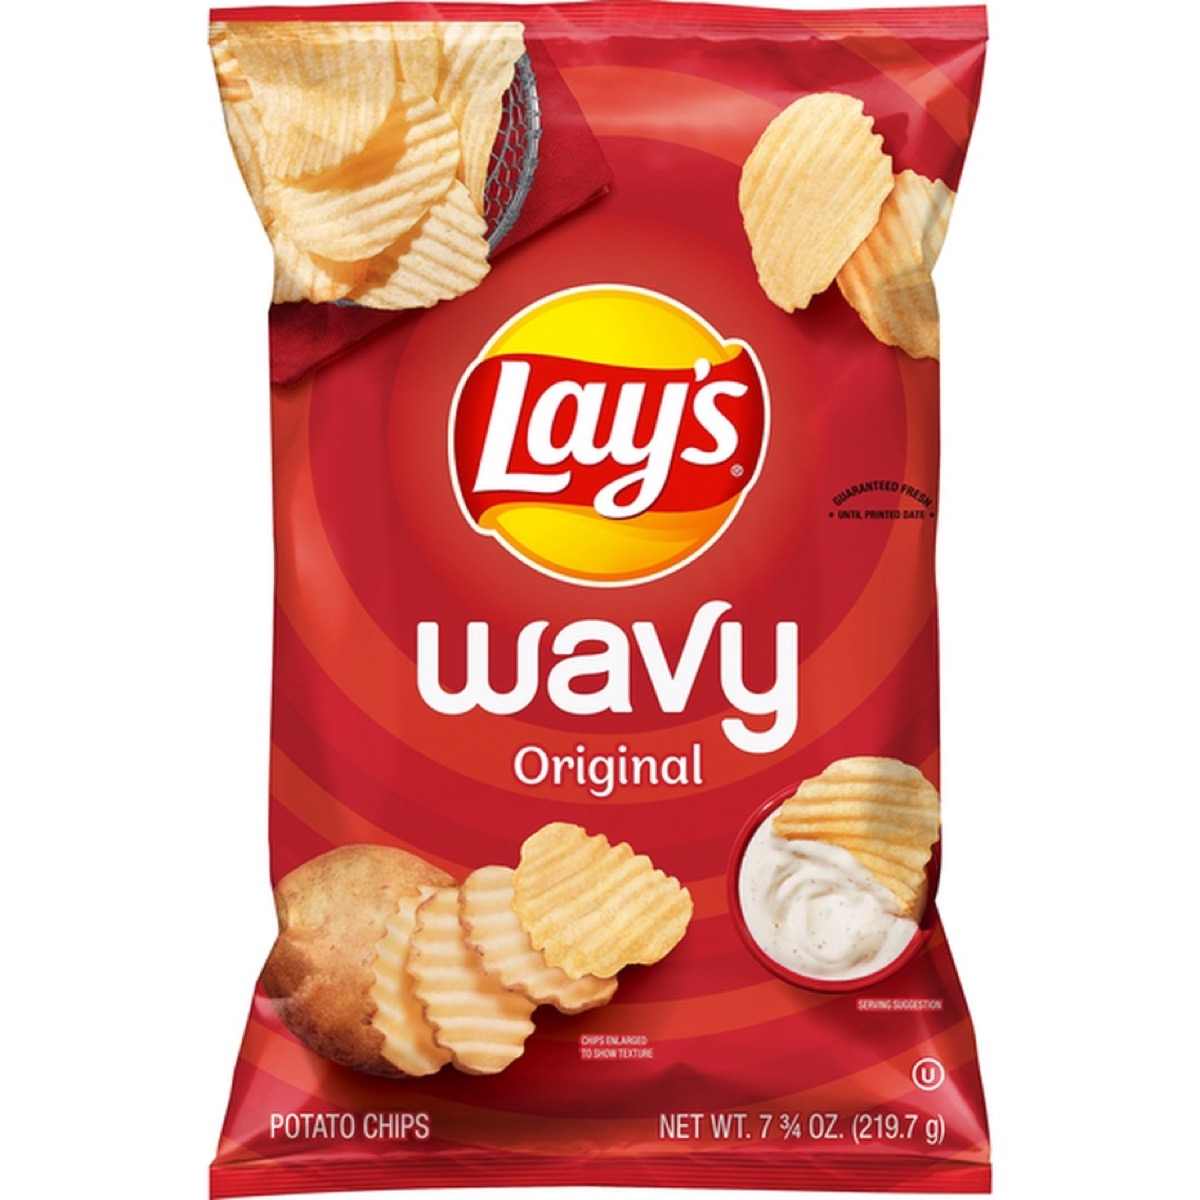 red bag of wavy lay's chips on white background